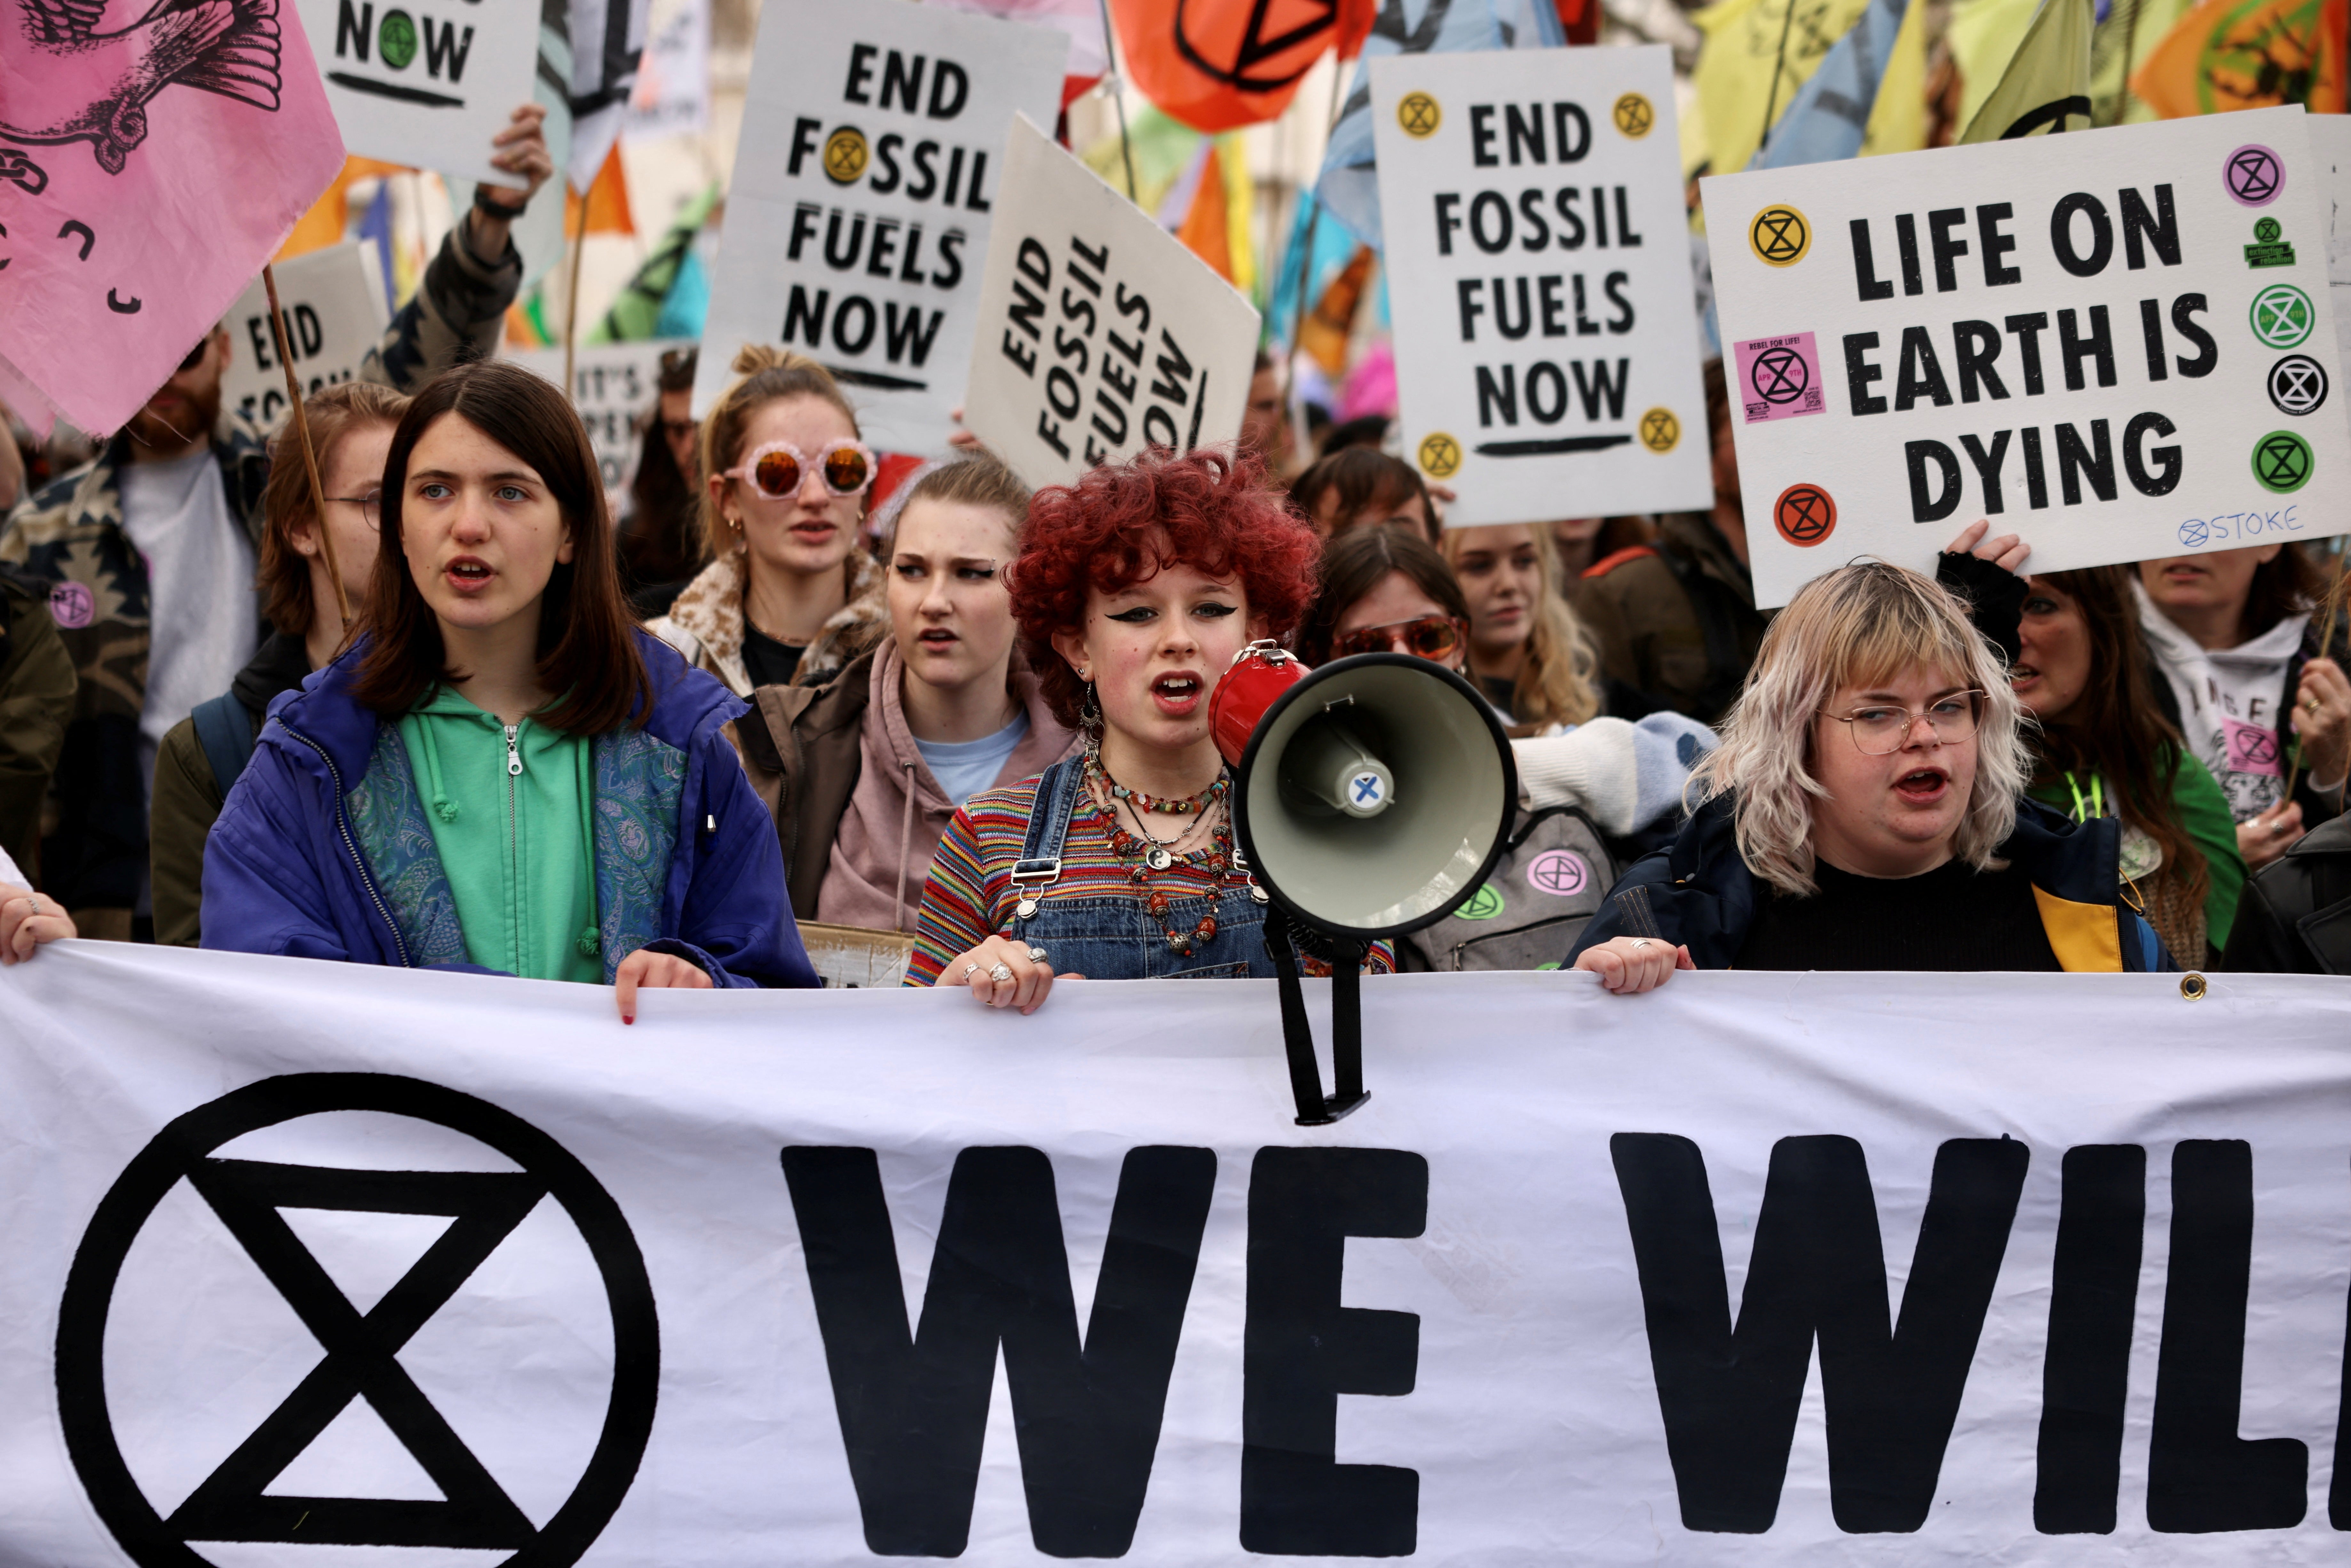 Extinction Rebellion spokespeople have said they want to ‘flood the streets of London’ with activists